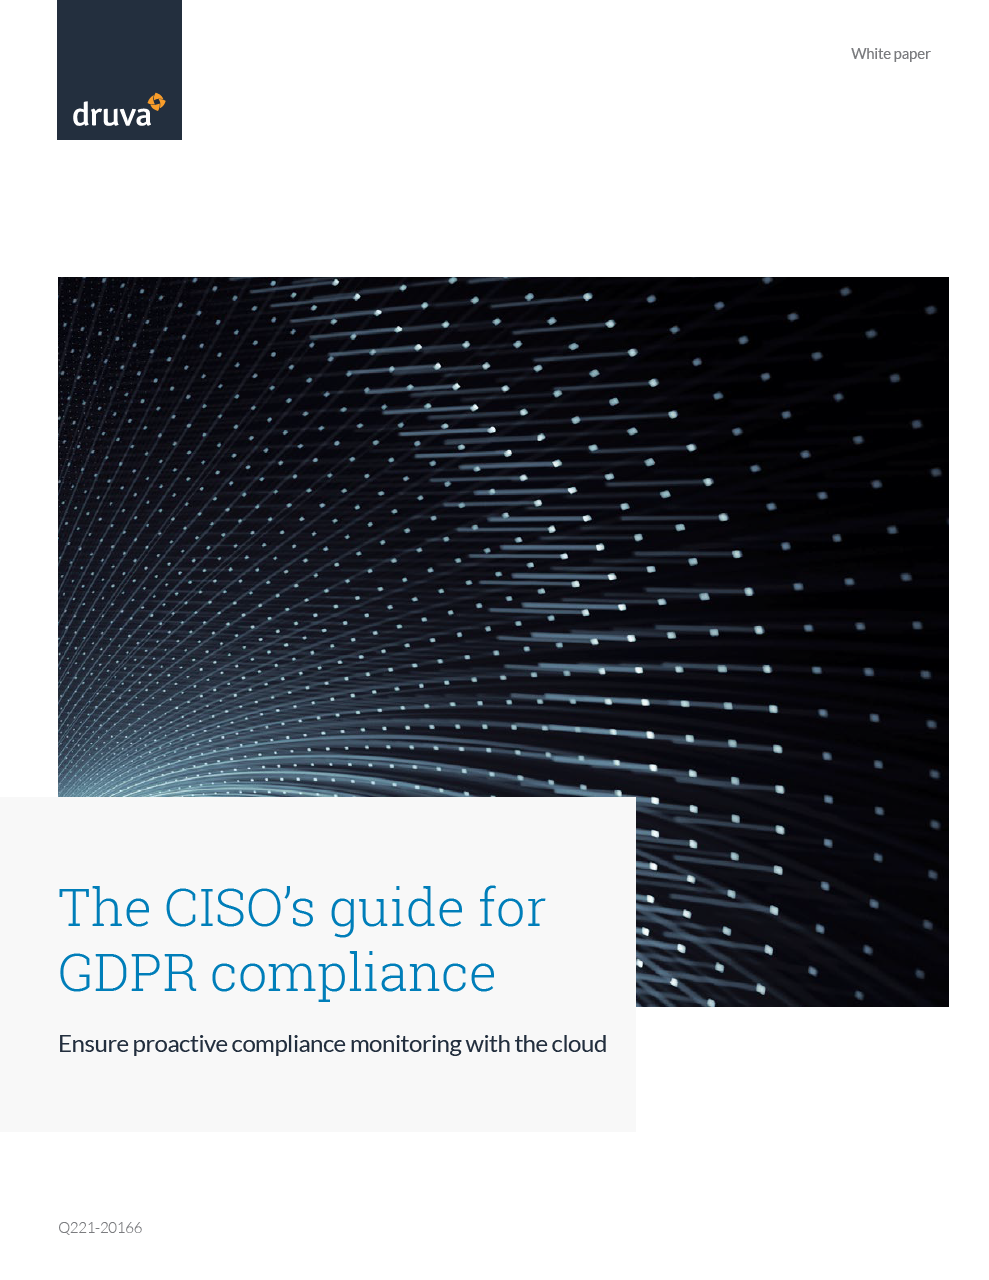 The CISO’s guide for GDPR compliance